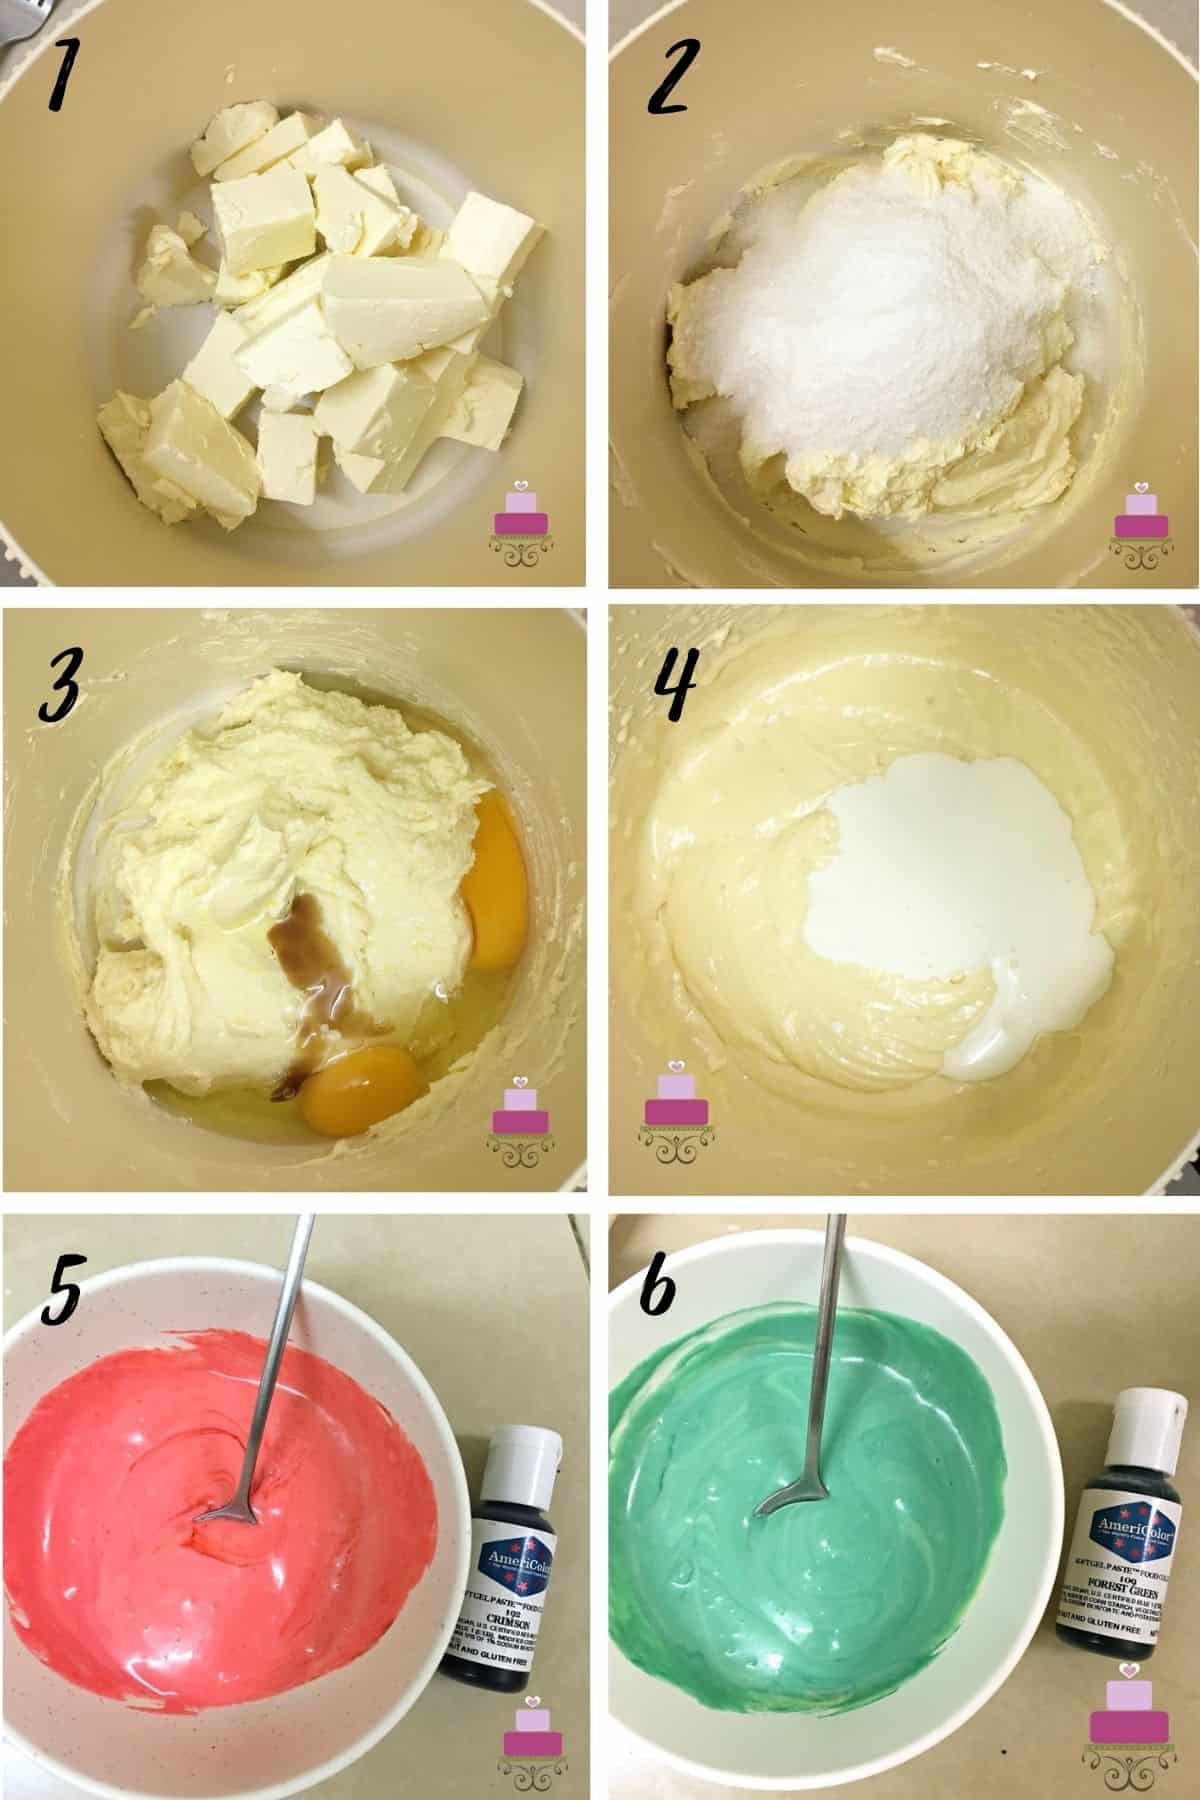 A poster of 6 images showing how to mix cheesecake batter and color some of it into green and red.